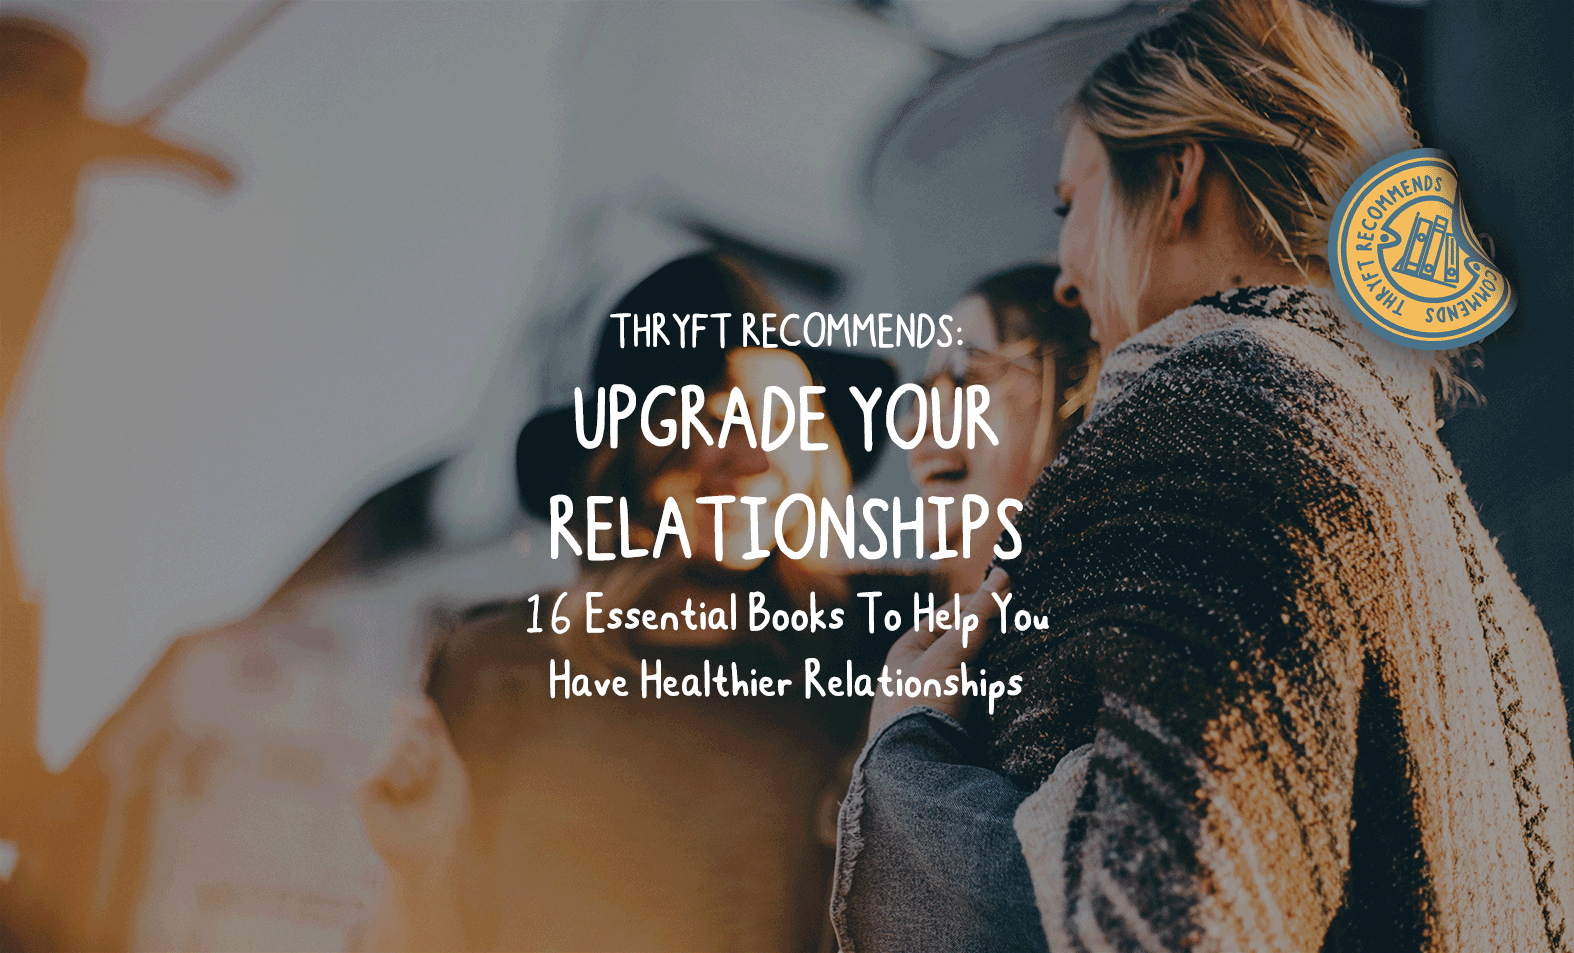 Upgrade Your Relationships: 16 Essential Books To Help You Have Healthier Relationships